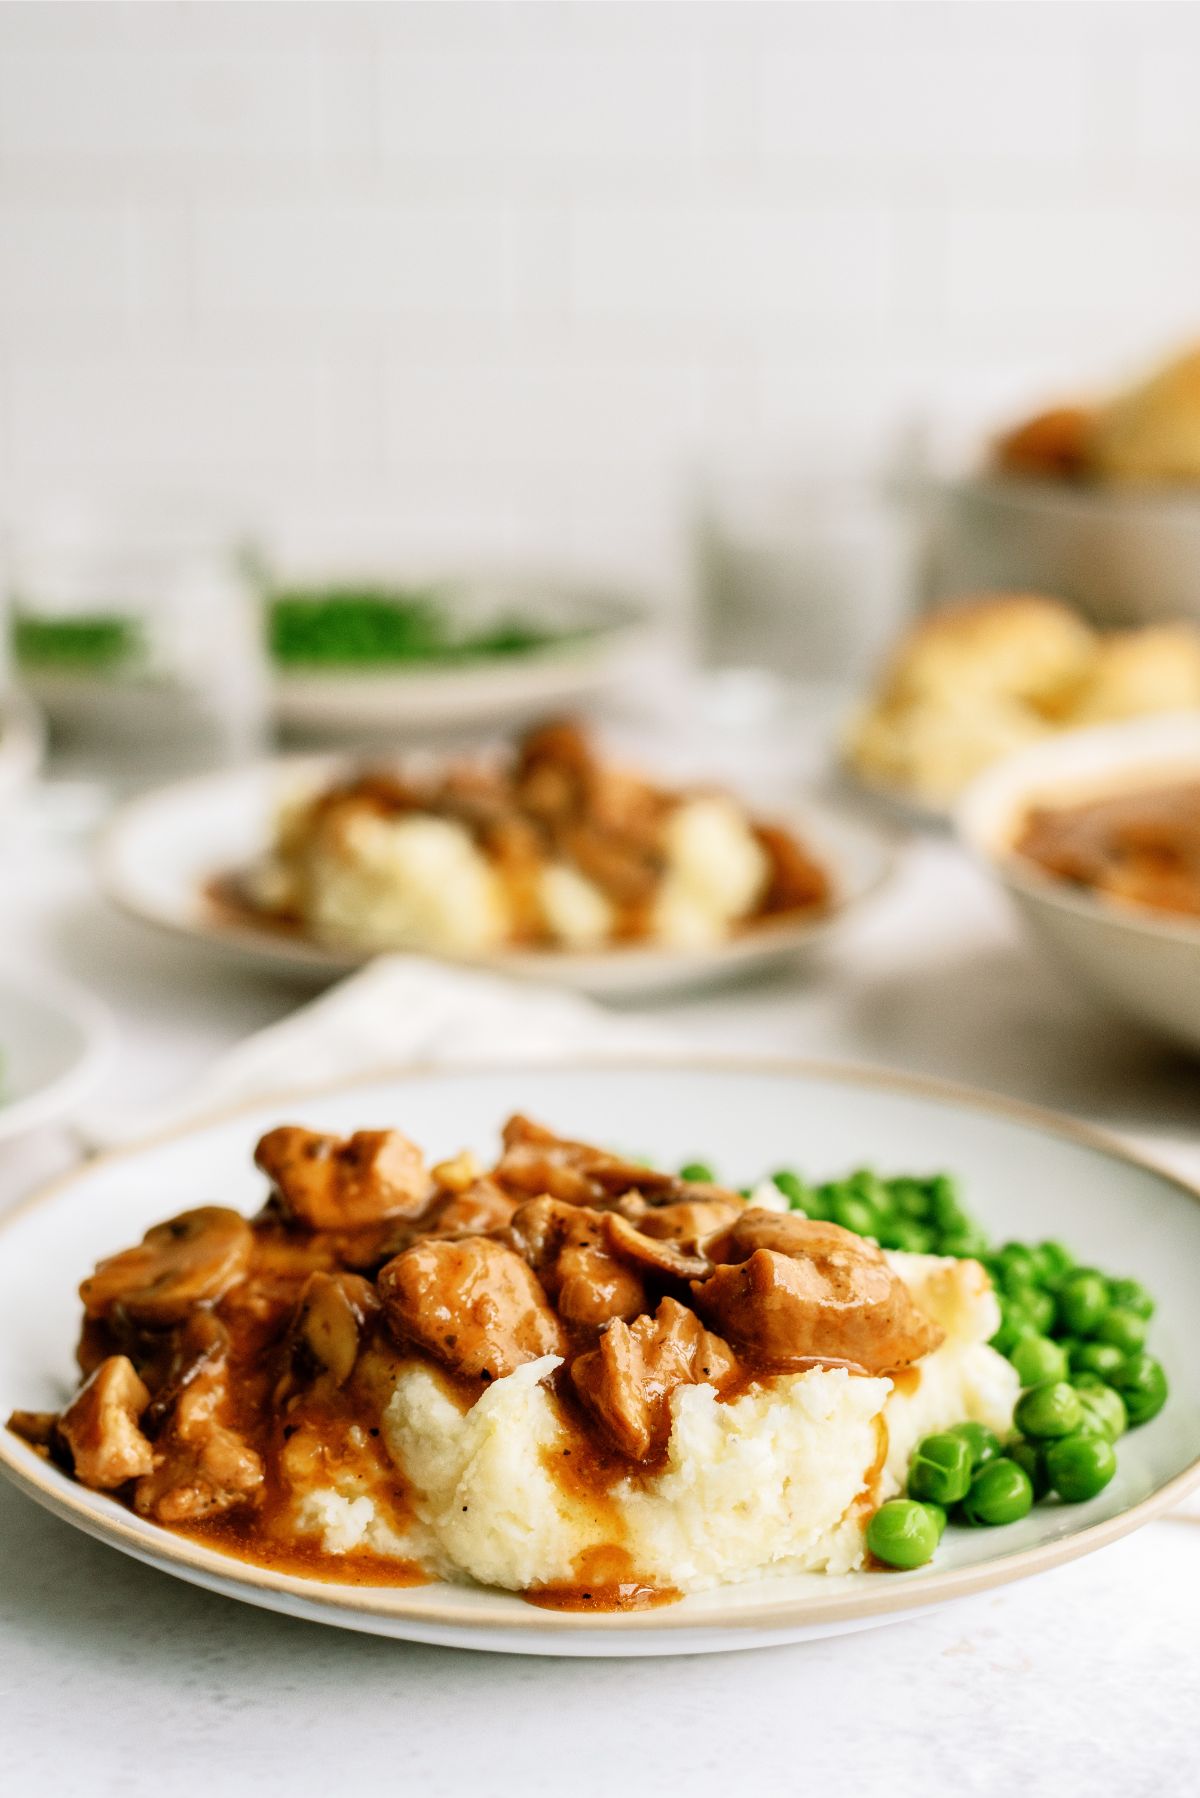 Plate of mashed potatoes topped with Instant Pot Pork Tips and Gravy with peas on the side